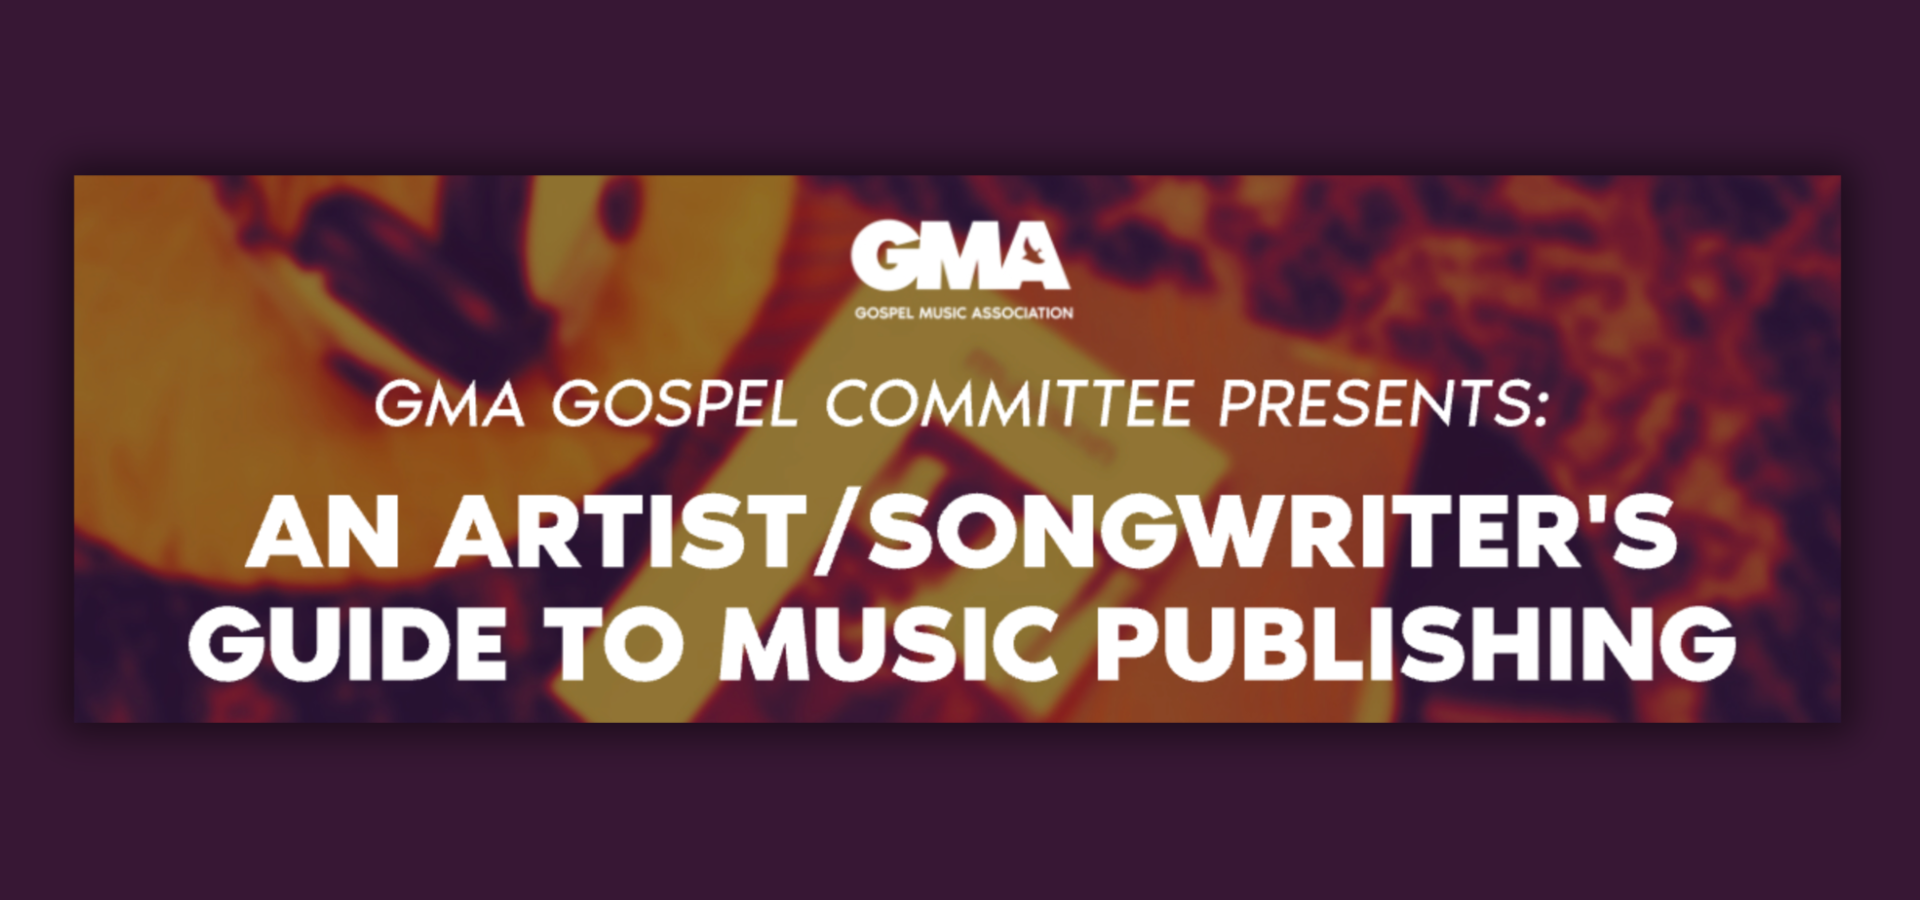 GMA Gospel Committee Presents: An Artist/Songwriter's Guide to Music Publishing